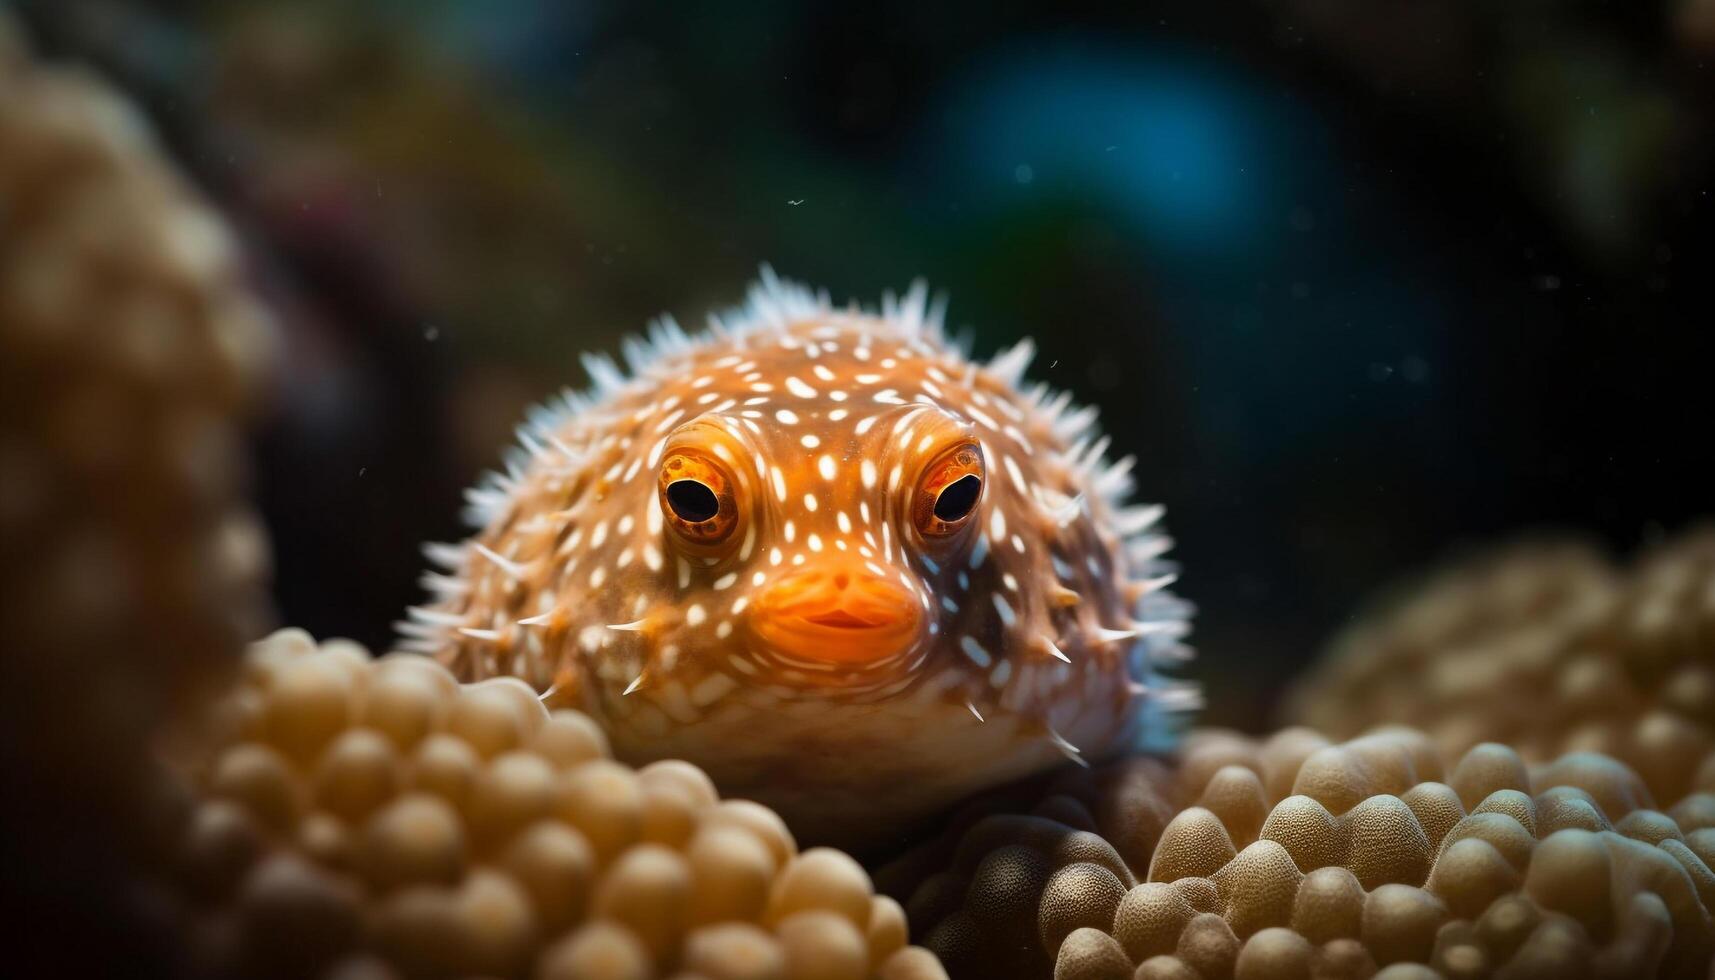 Cute yellow clown fish in close up, looking at camera generated by AI photo